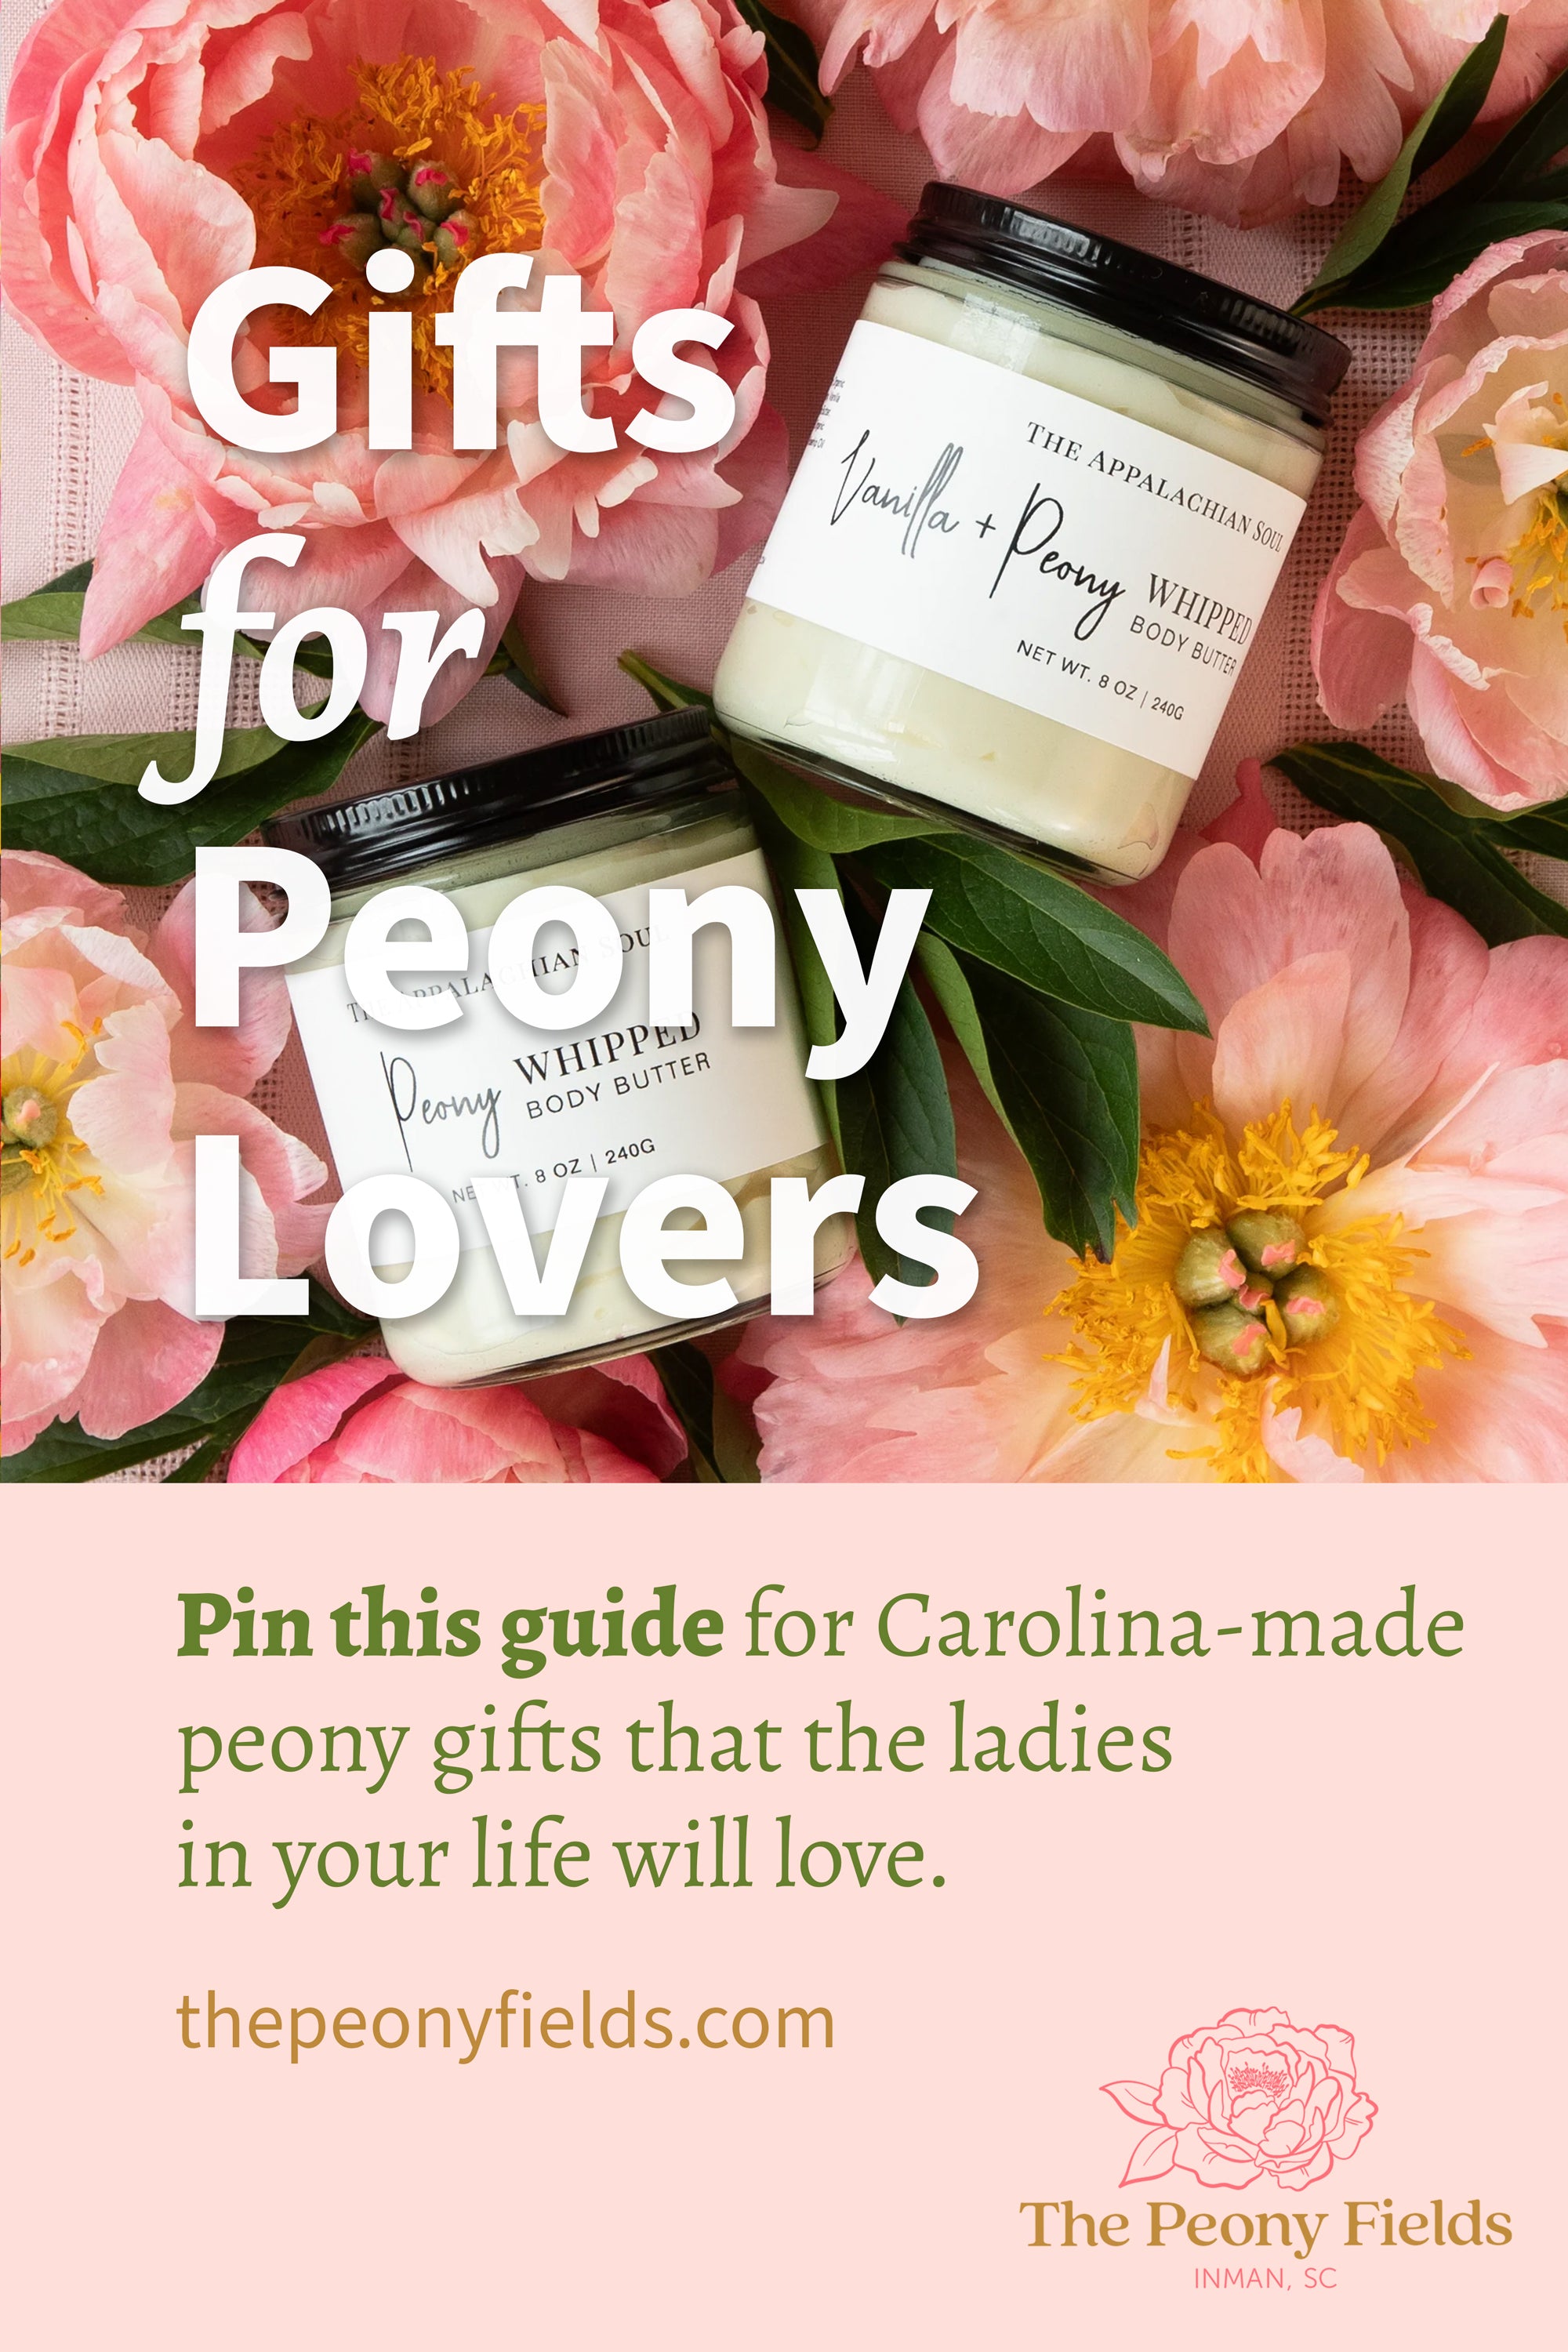 Gifts for Peony Lovers